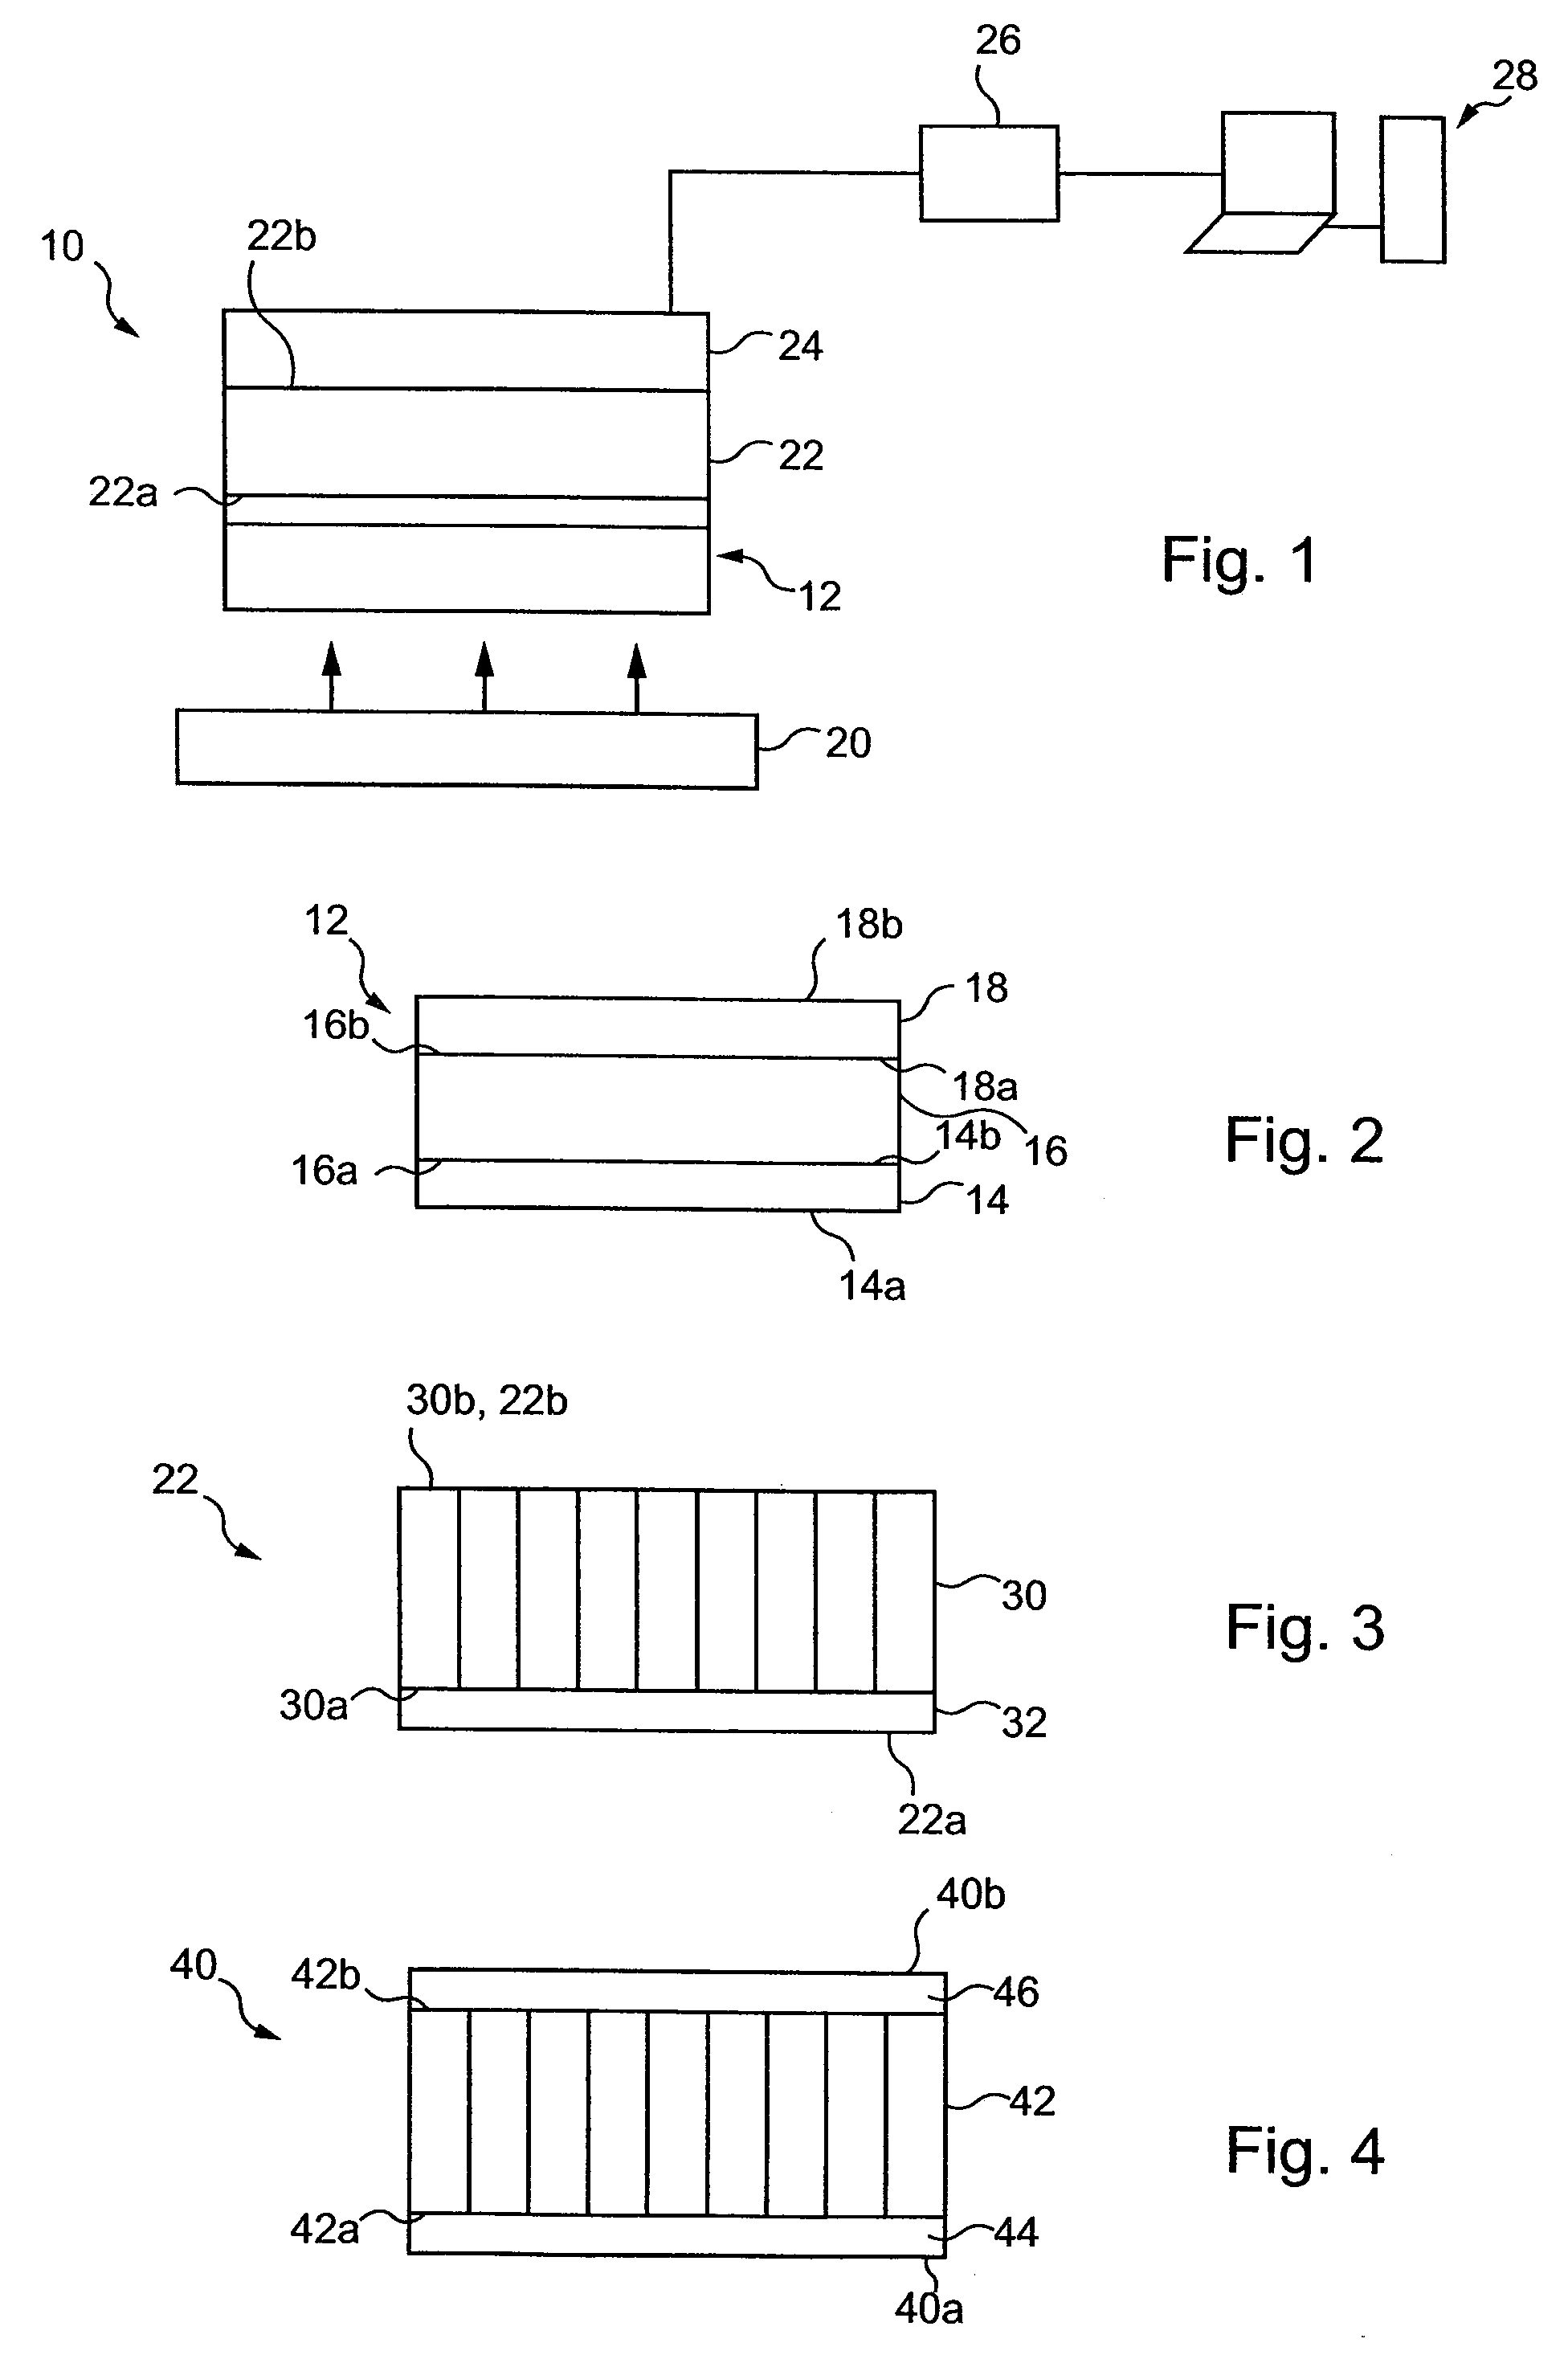 Photostimulable plate reading device